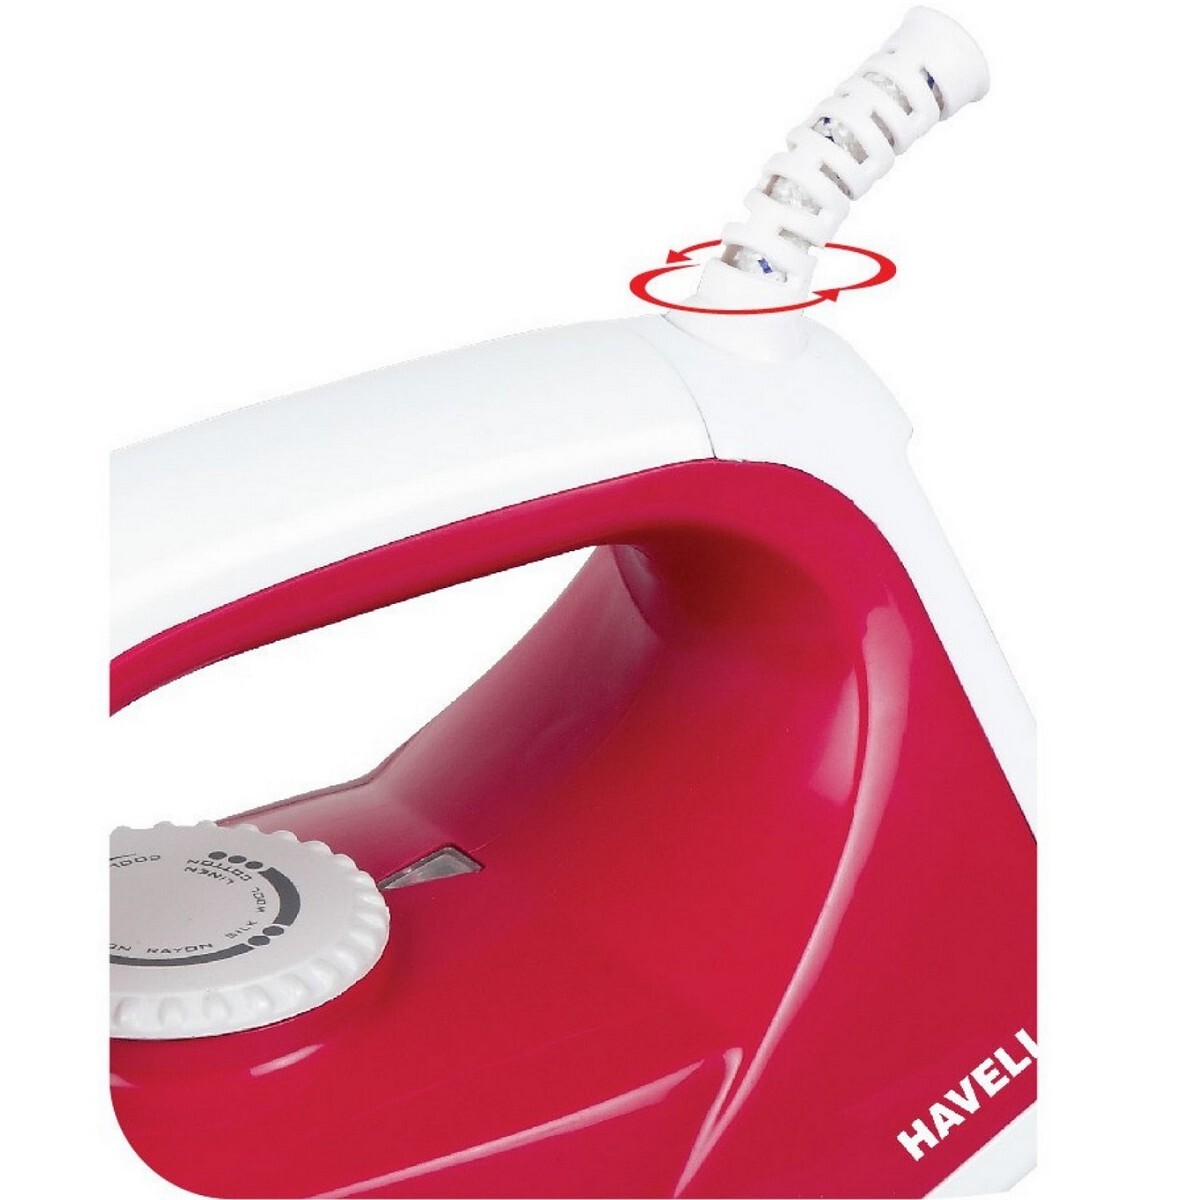 Havells Dry Iron Glace Ruby 750W